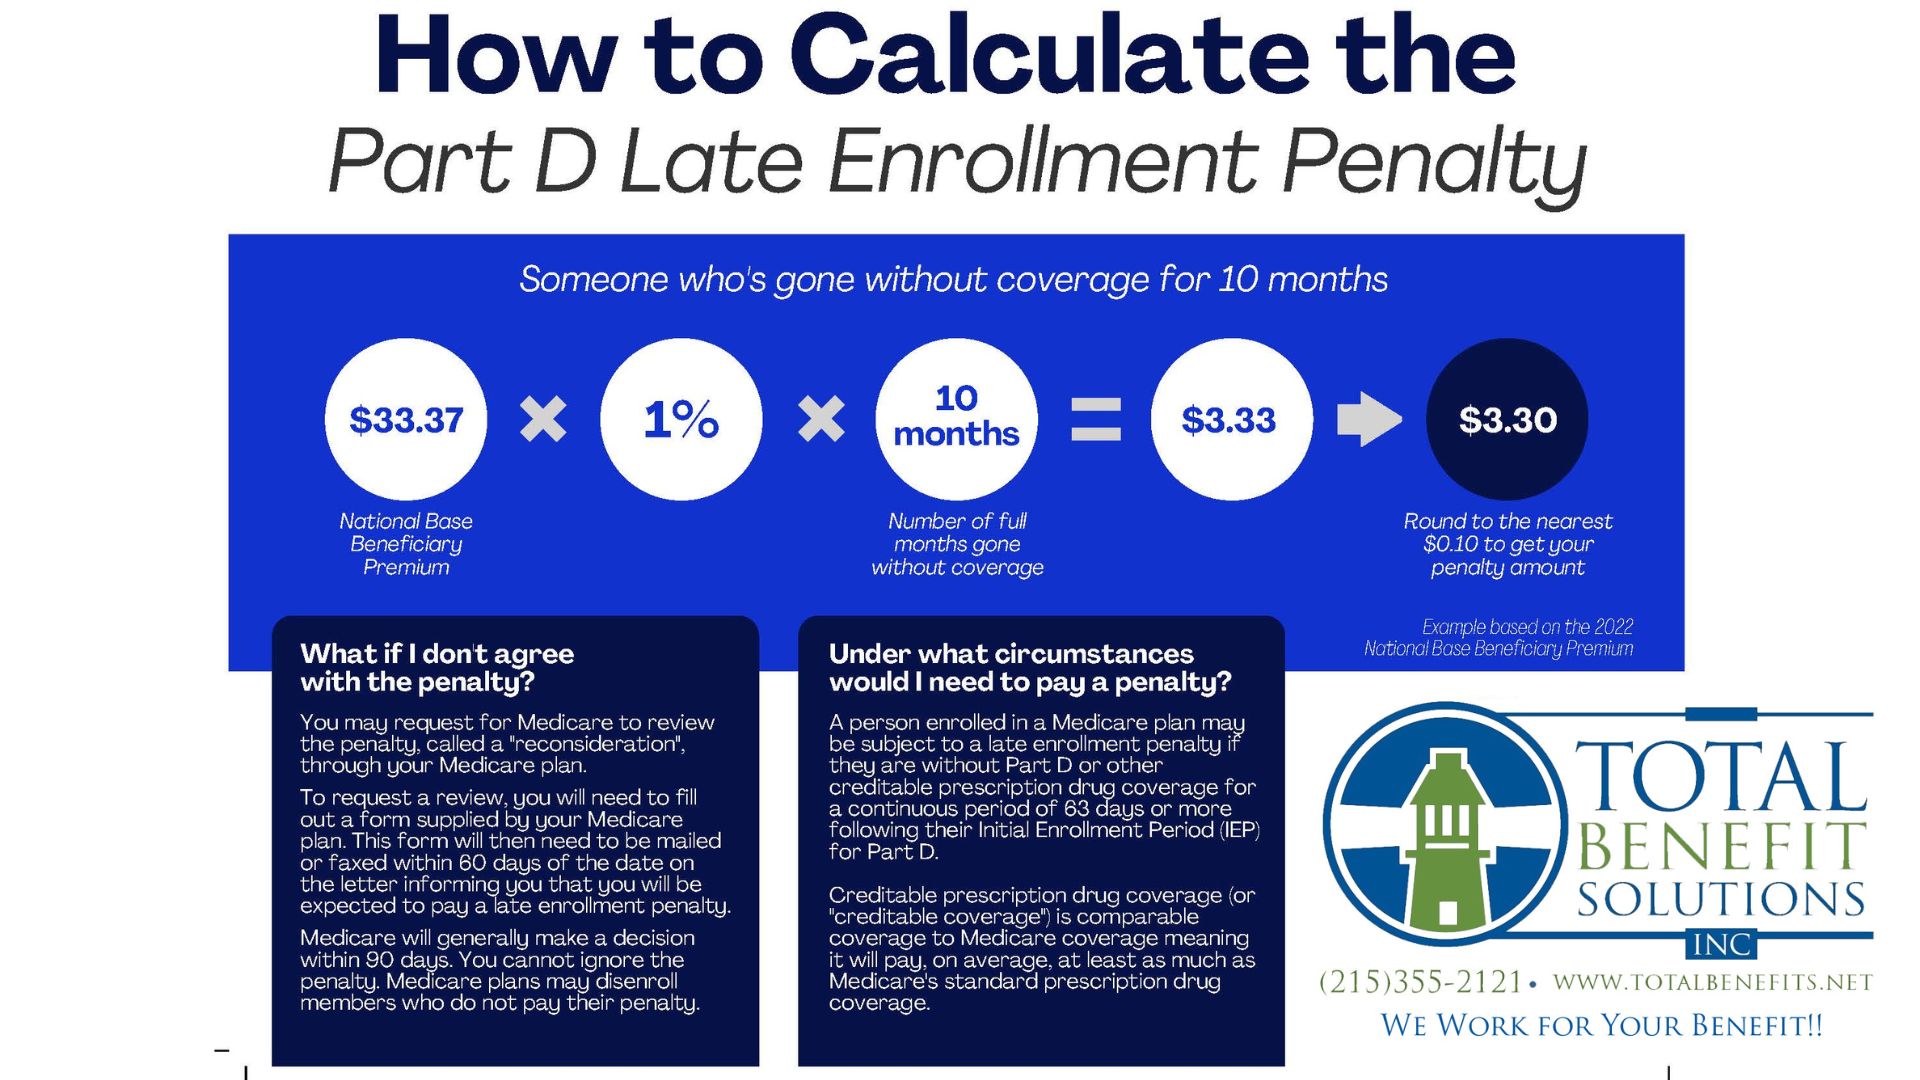 How is the Part D Late Enrollment Penalty Calculated? Total Benefit